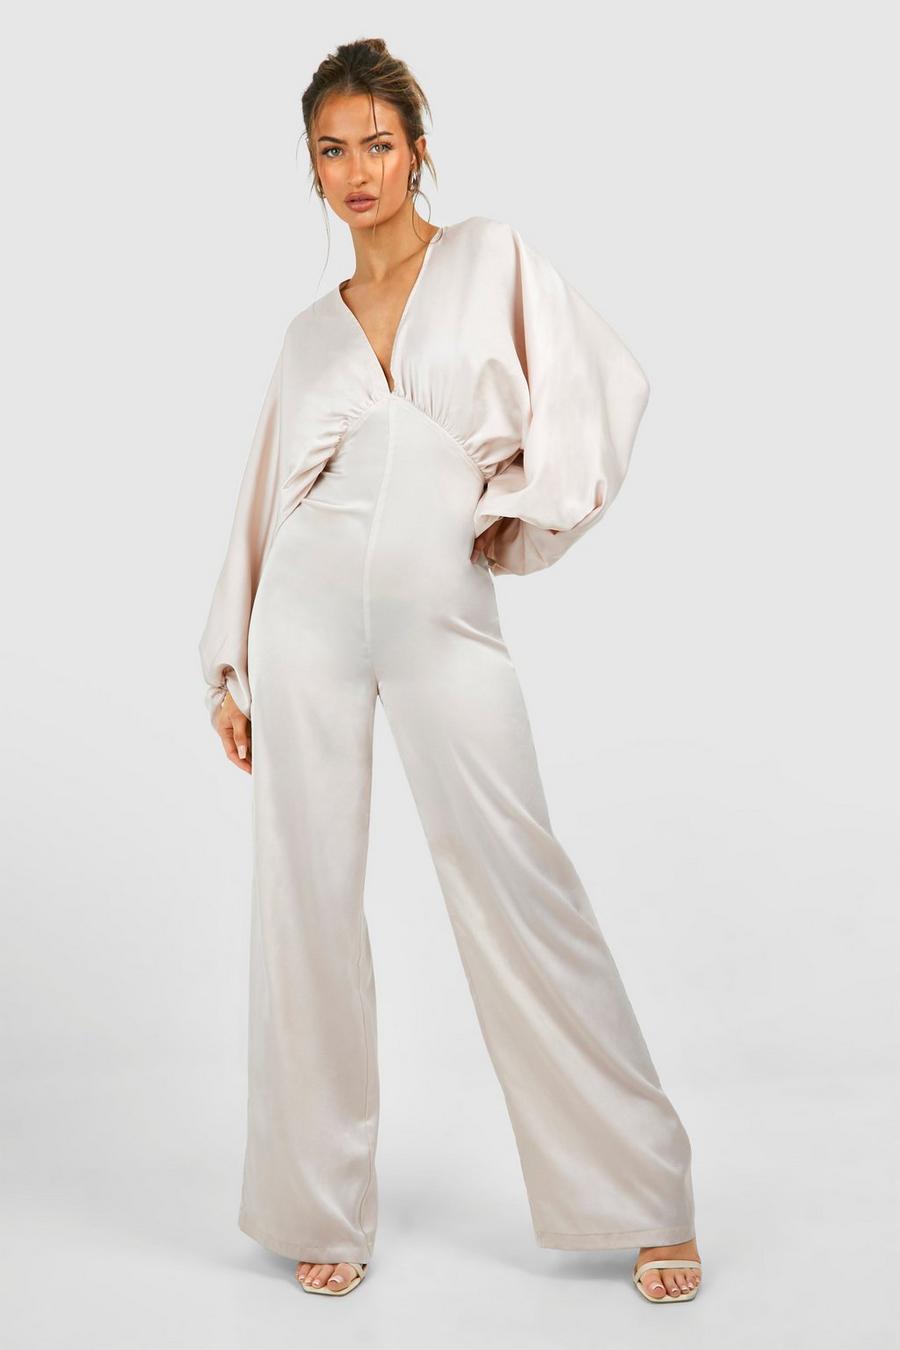 Champagne Matte Satin Extreme Sleeve Jumpsuit